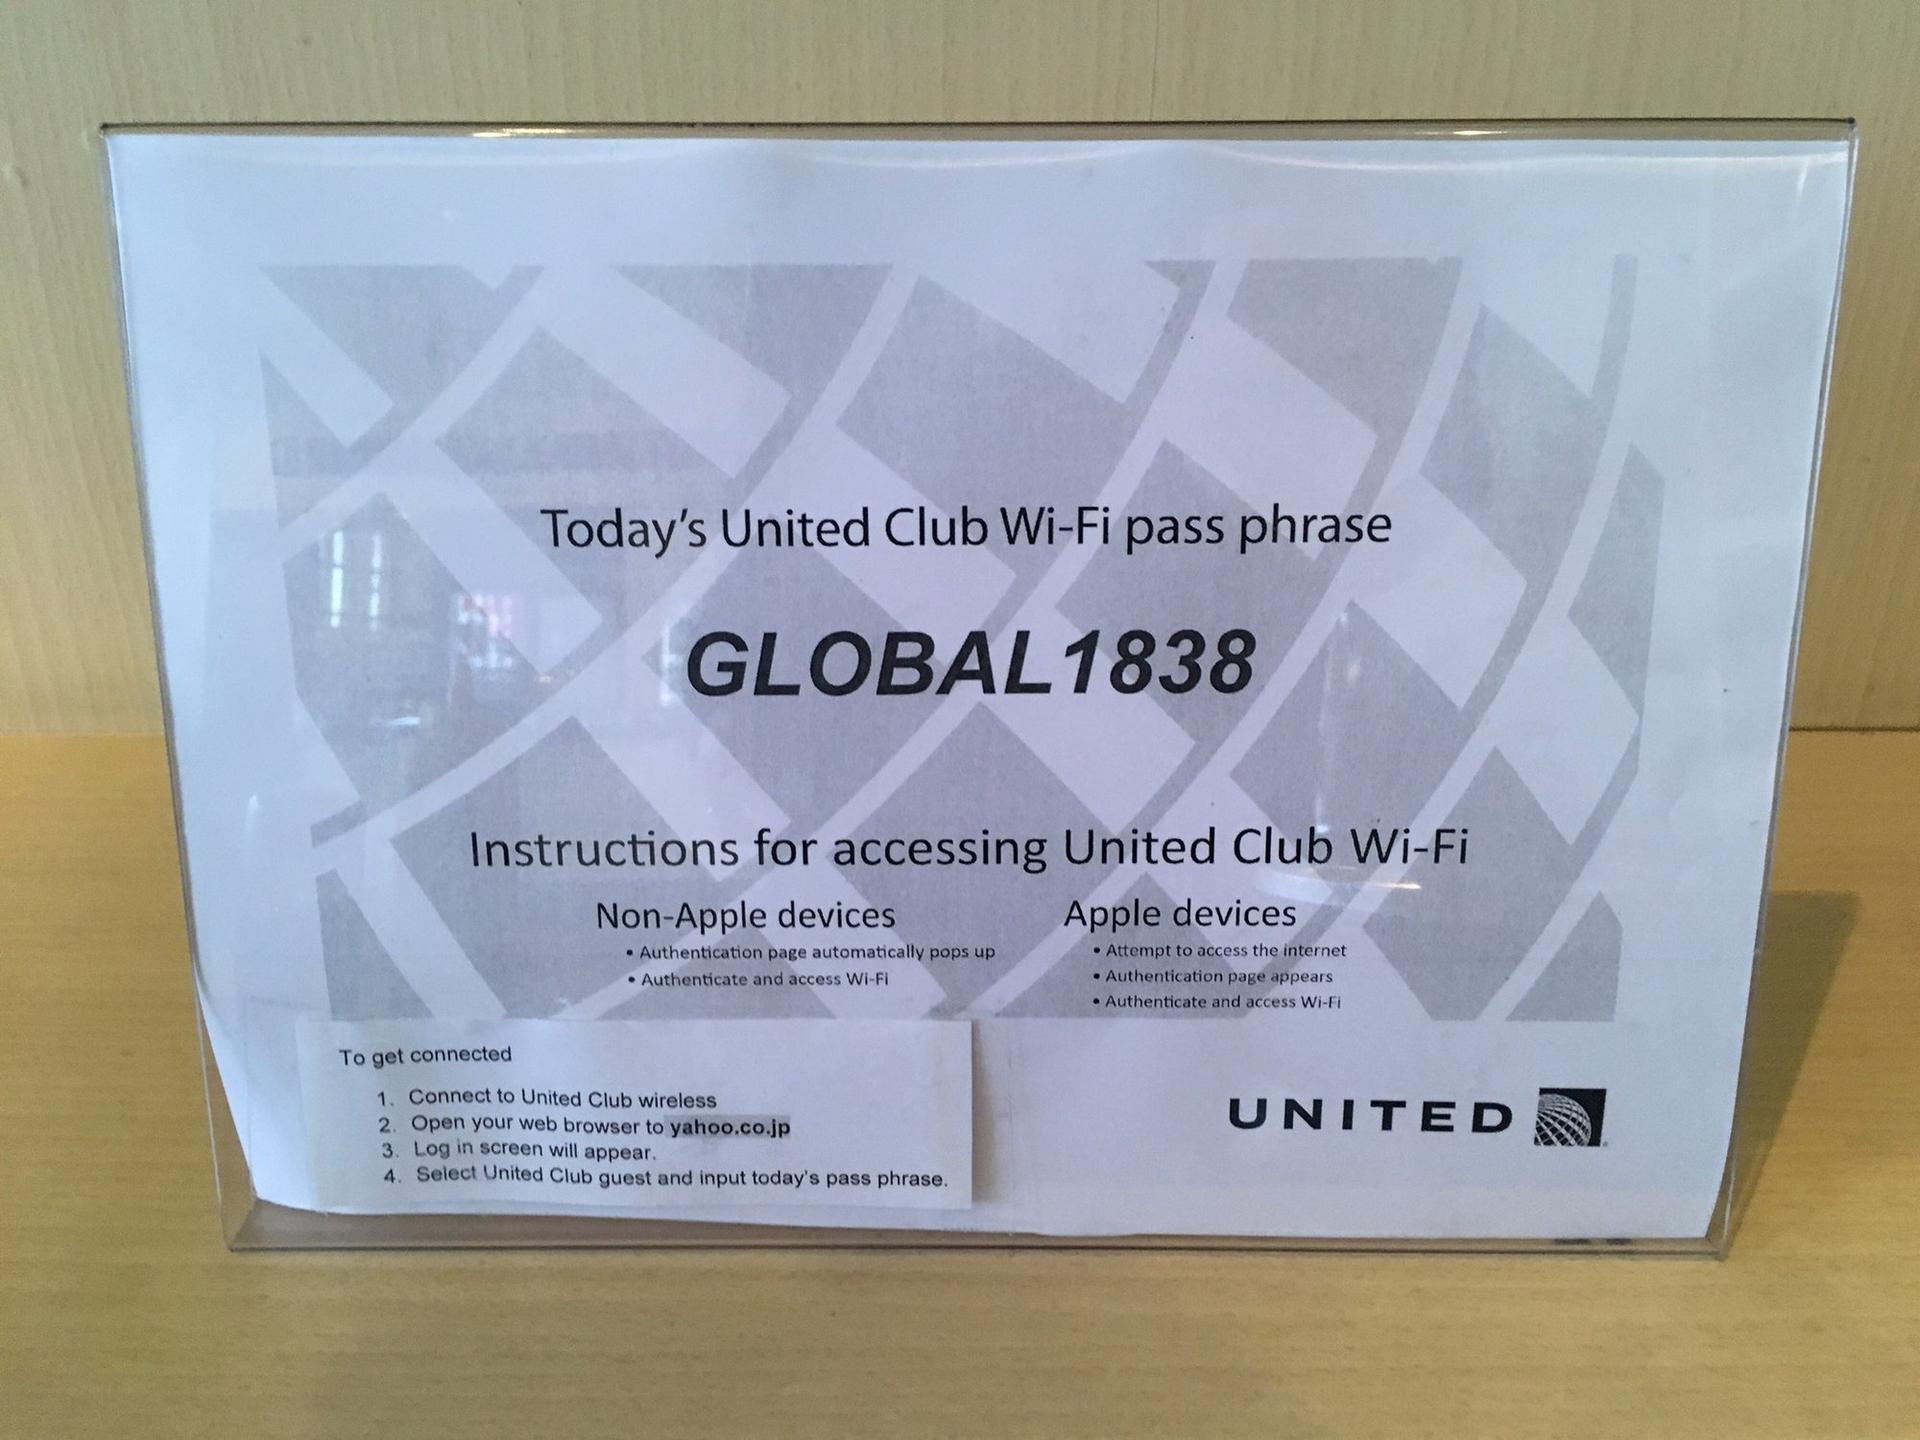 United Airlines United Club image 40 of 52